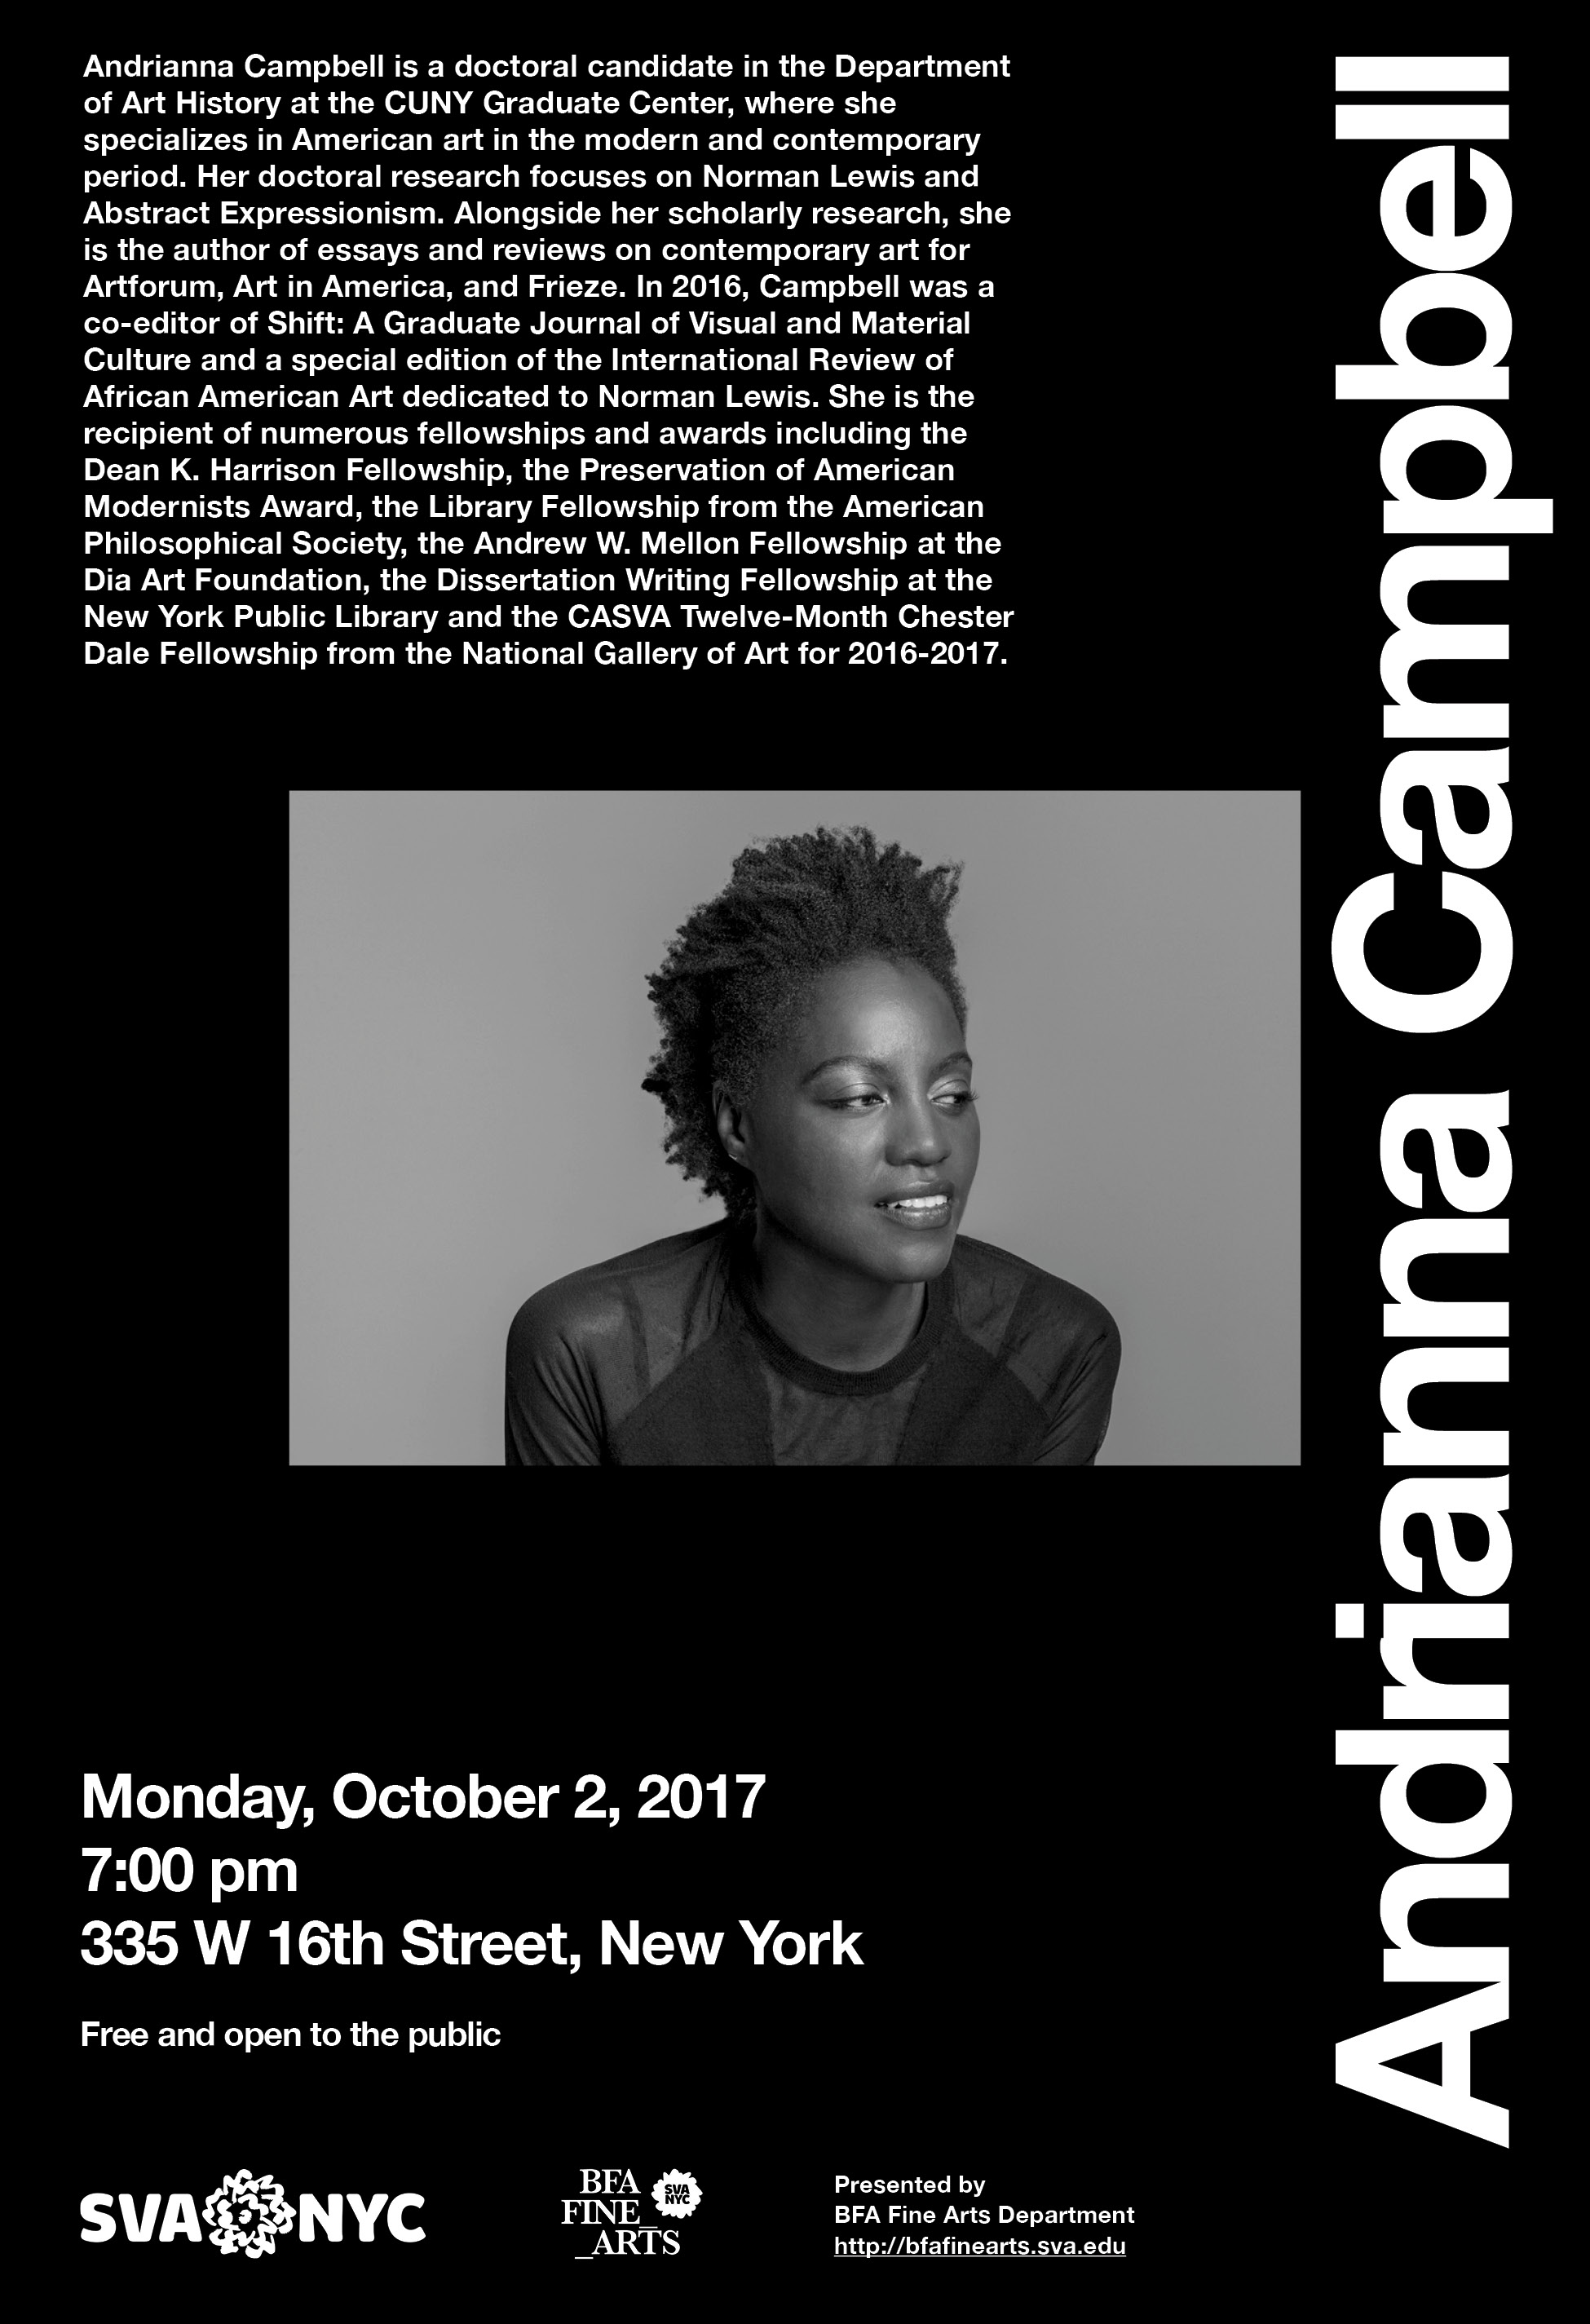 Poster with a description of the Andrianna Campbell lecture on the top left corner, "Andrianna Campbell" is written on the right side of the poster, information of location and time is written on the bottom left corner with a black/white image of Andrianna Campbell in the center of the poster, all text is white on a black background